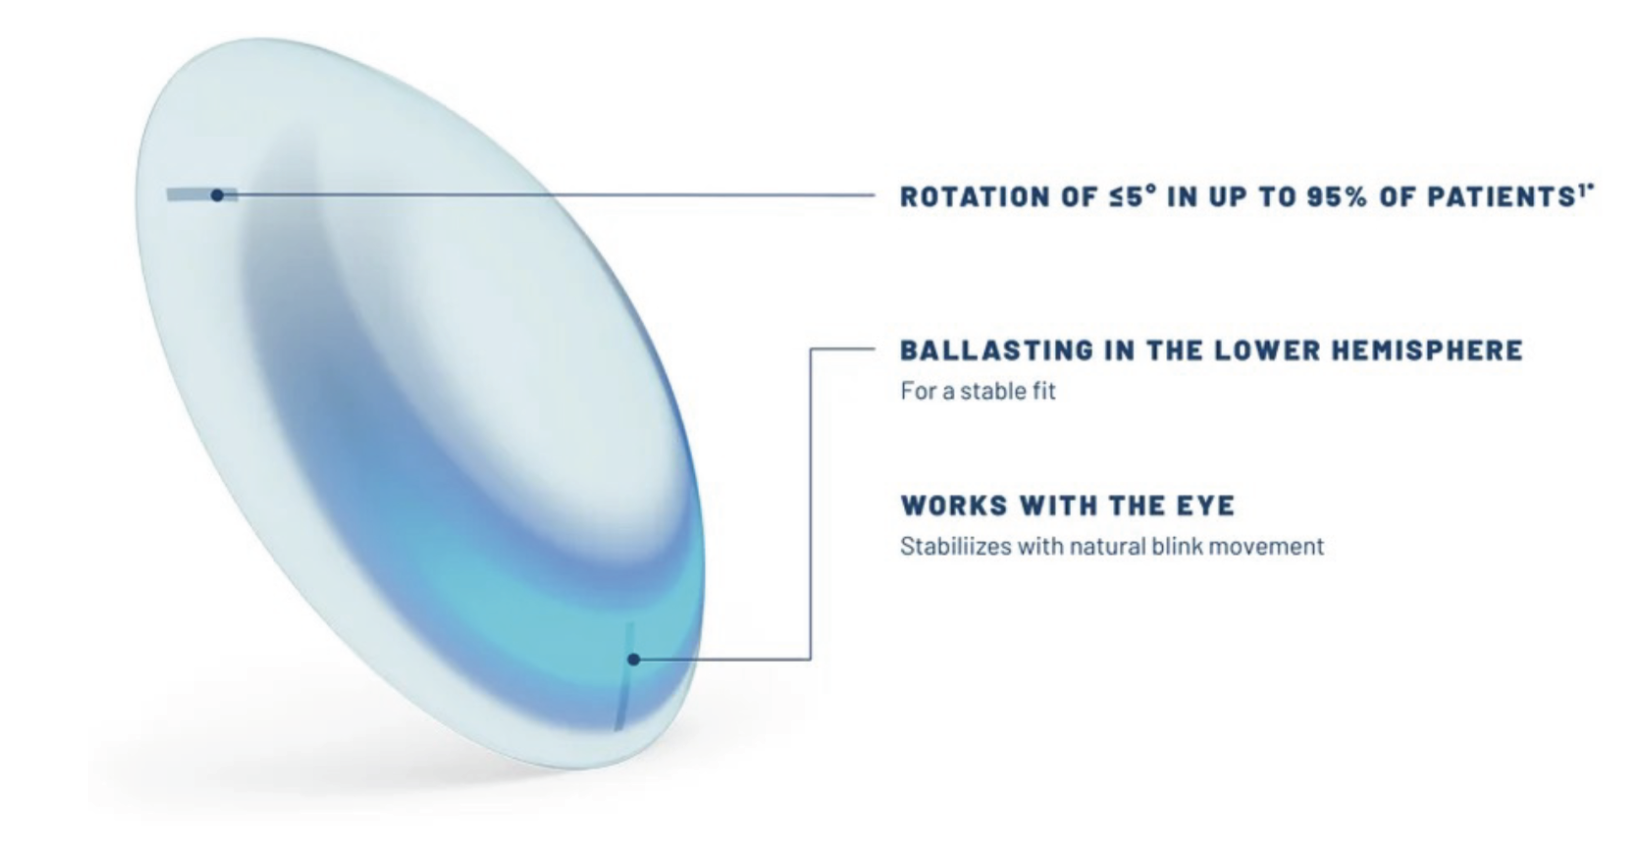 Fig. 3. B+L’s “OpticAlign” design, featured in Ultra multifocal for astigmatism, guarentees a rotation of 5° or less for 95% of patients.